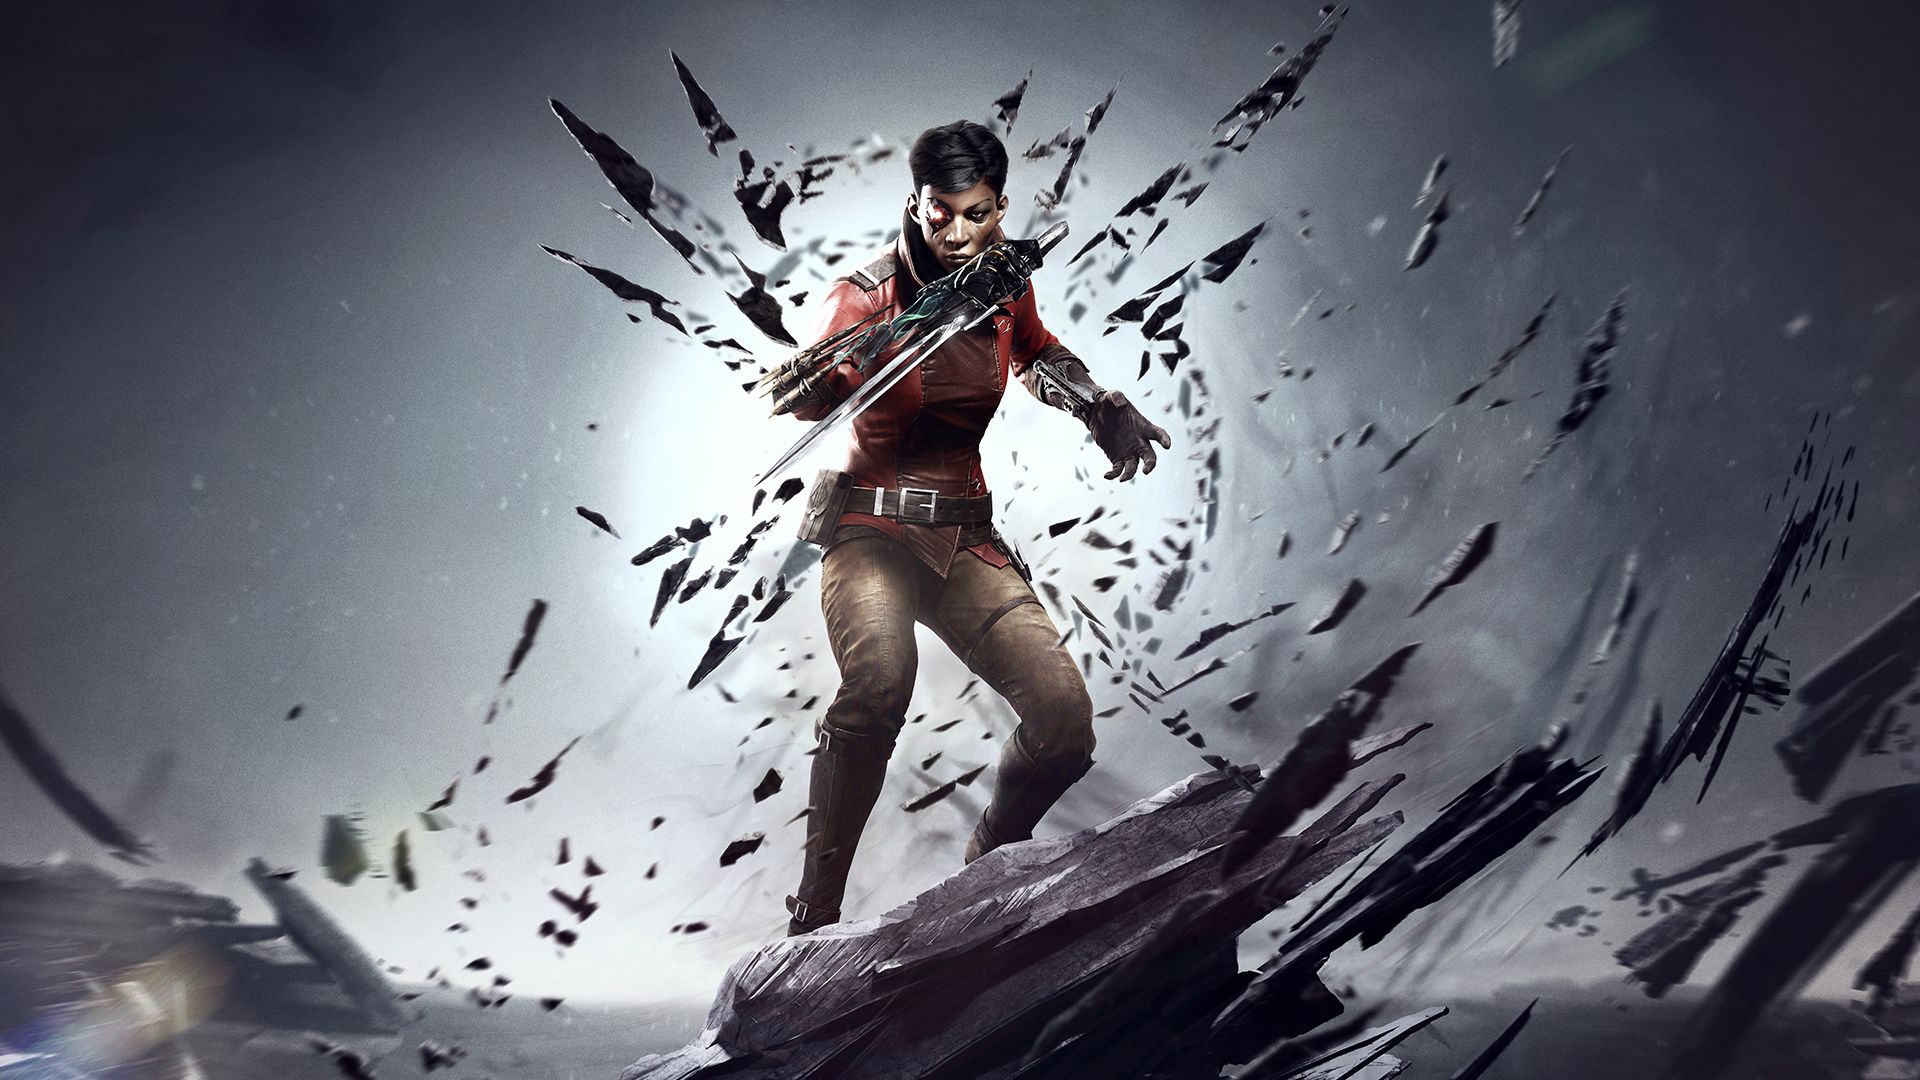 Dishonored Death Of The Outsider Will Be A Good Entry Point For Series Newcomers